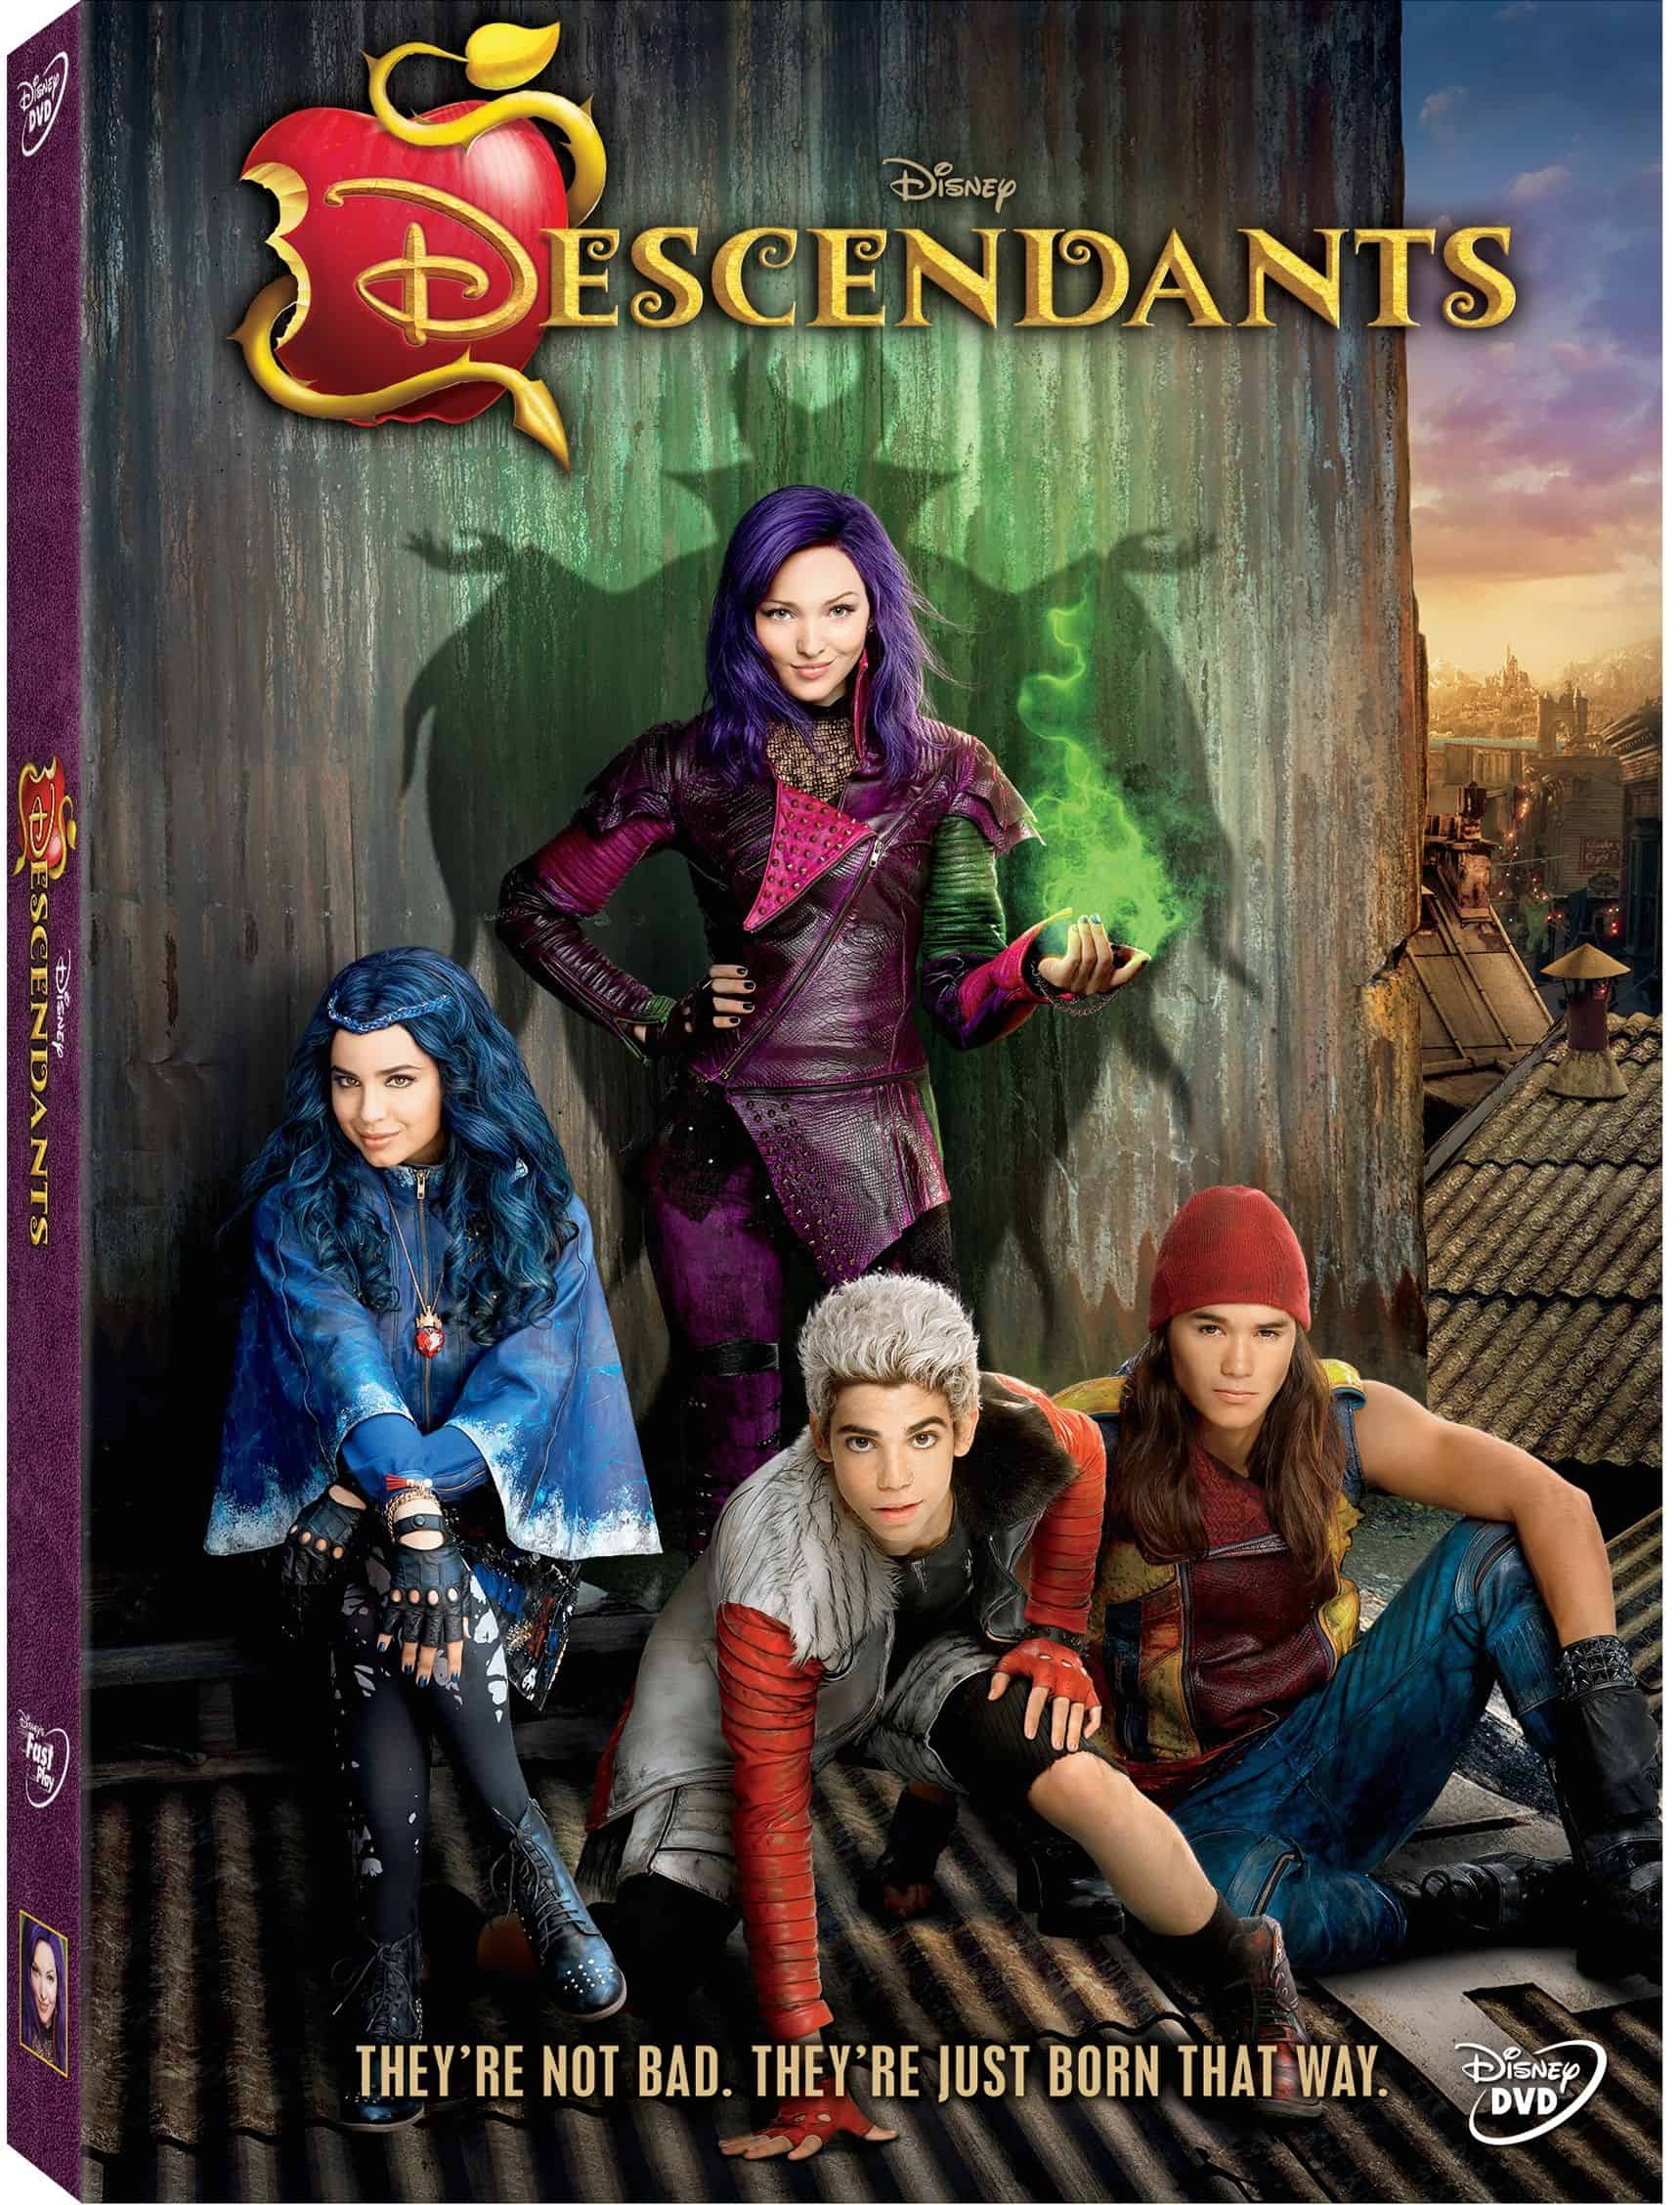 disney-descendants-dvd-review-this-roller-coaster-called-life